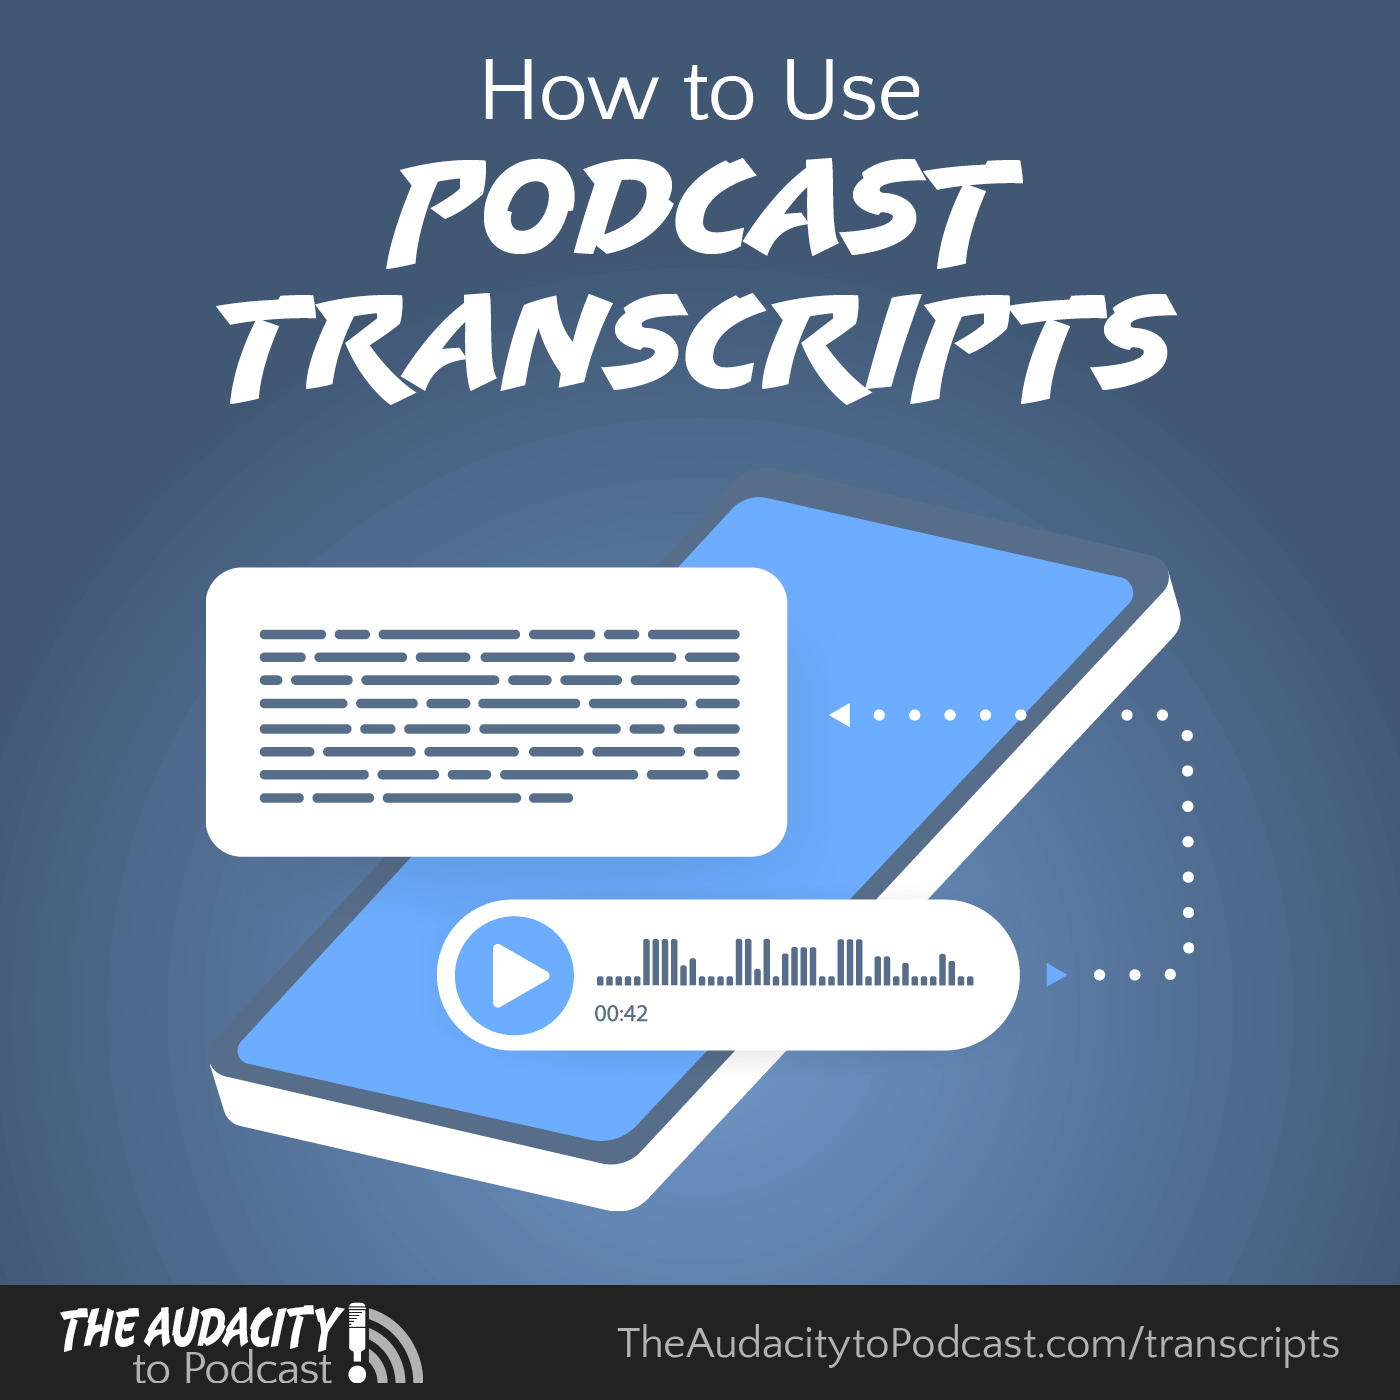 How to Use Podcast Transcripts